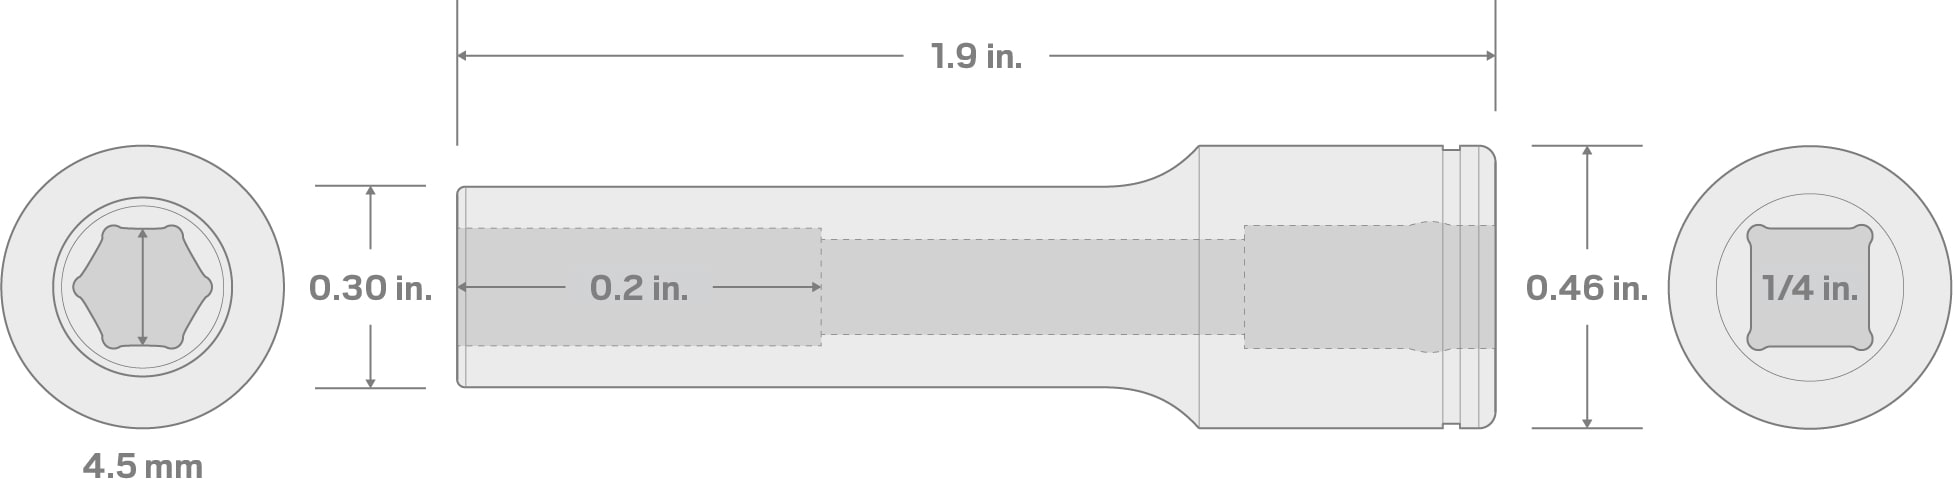 Specs for 1/4 Inch Drive x 4.5 mm Deep 6-Point Socket